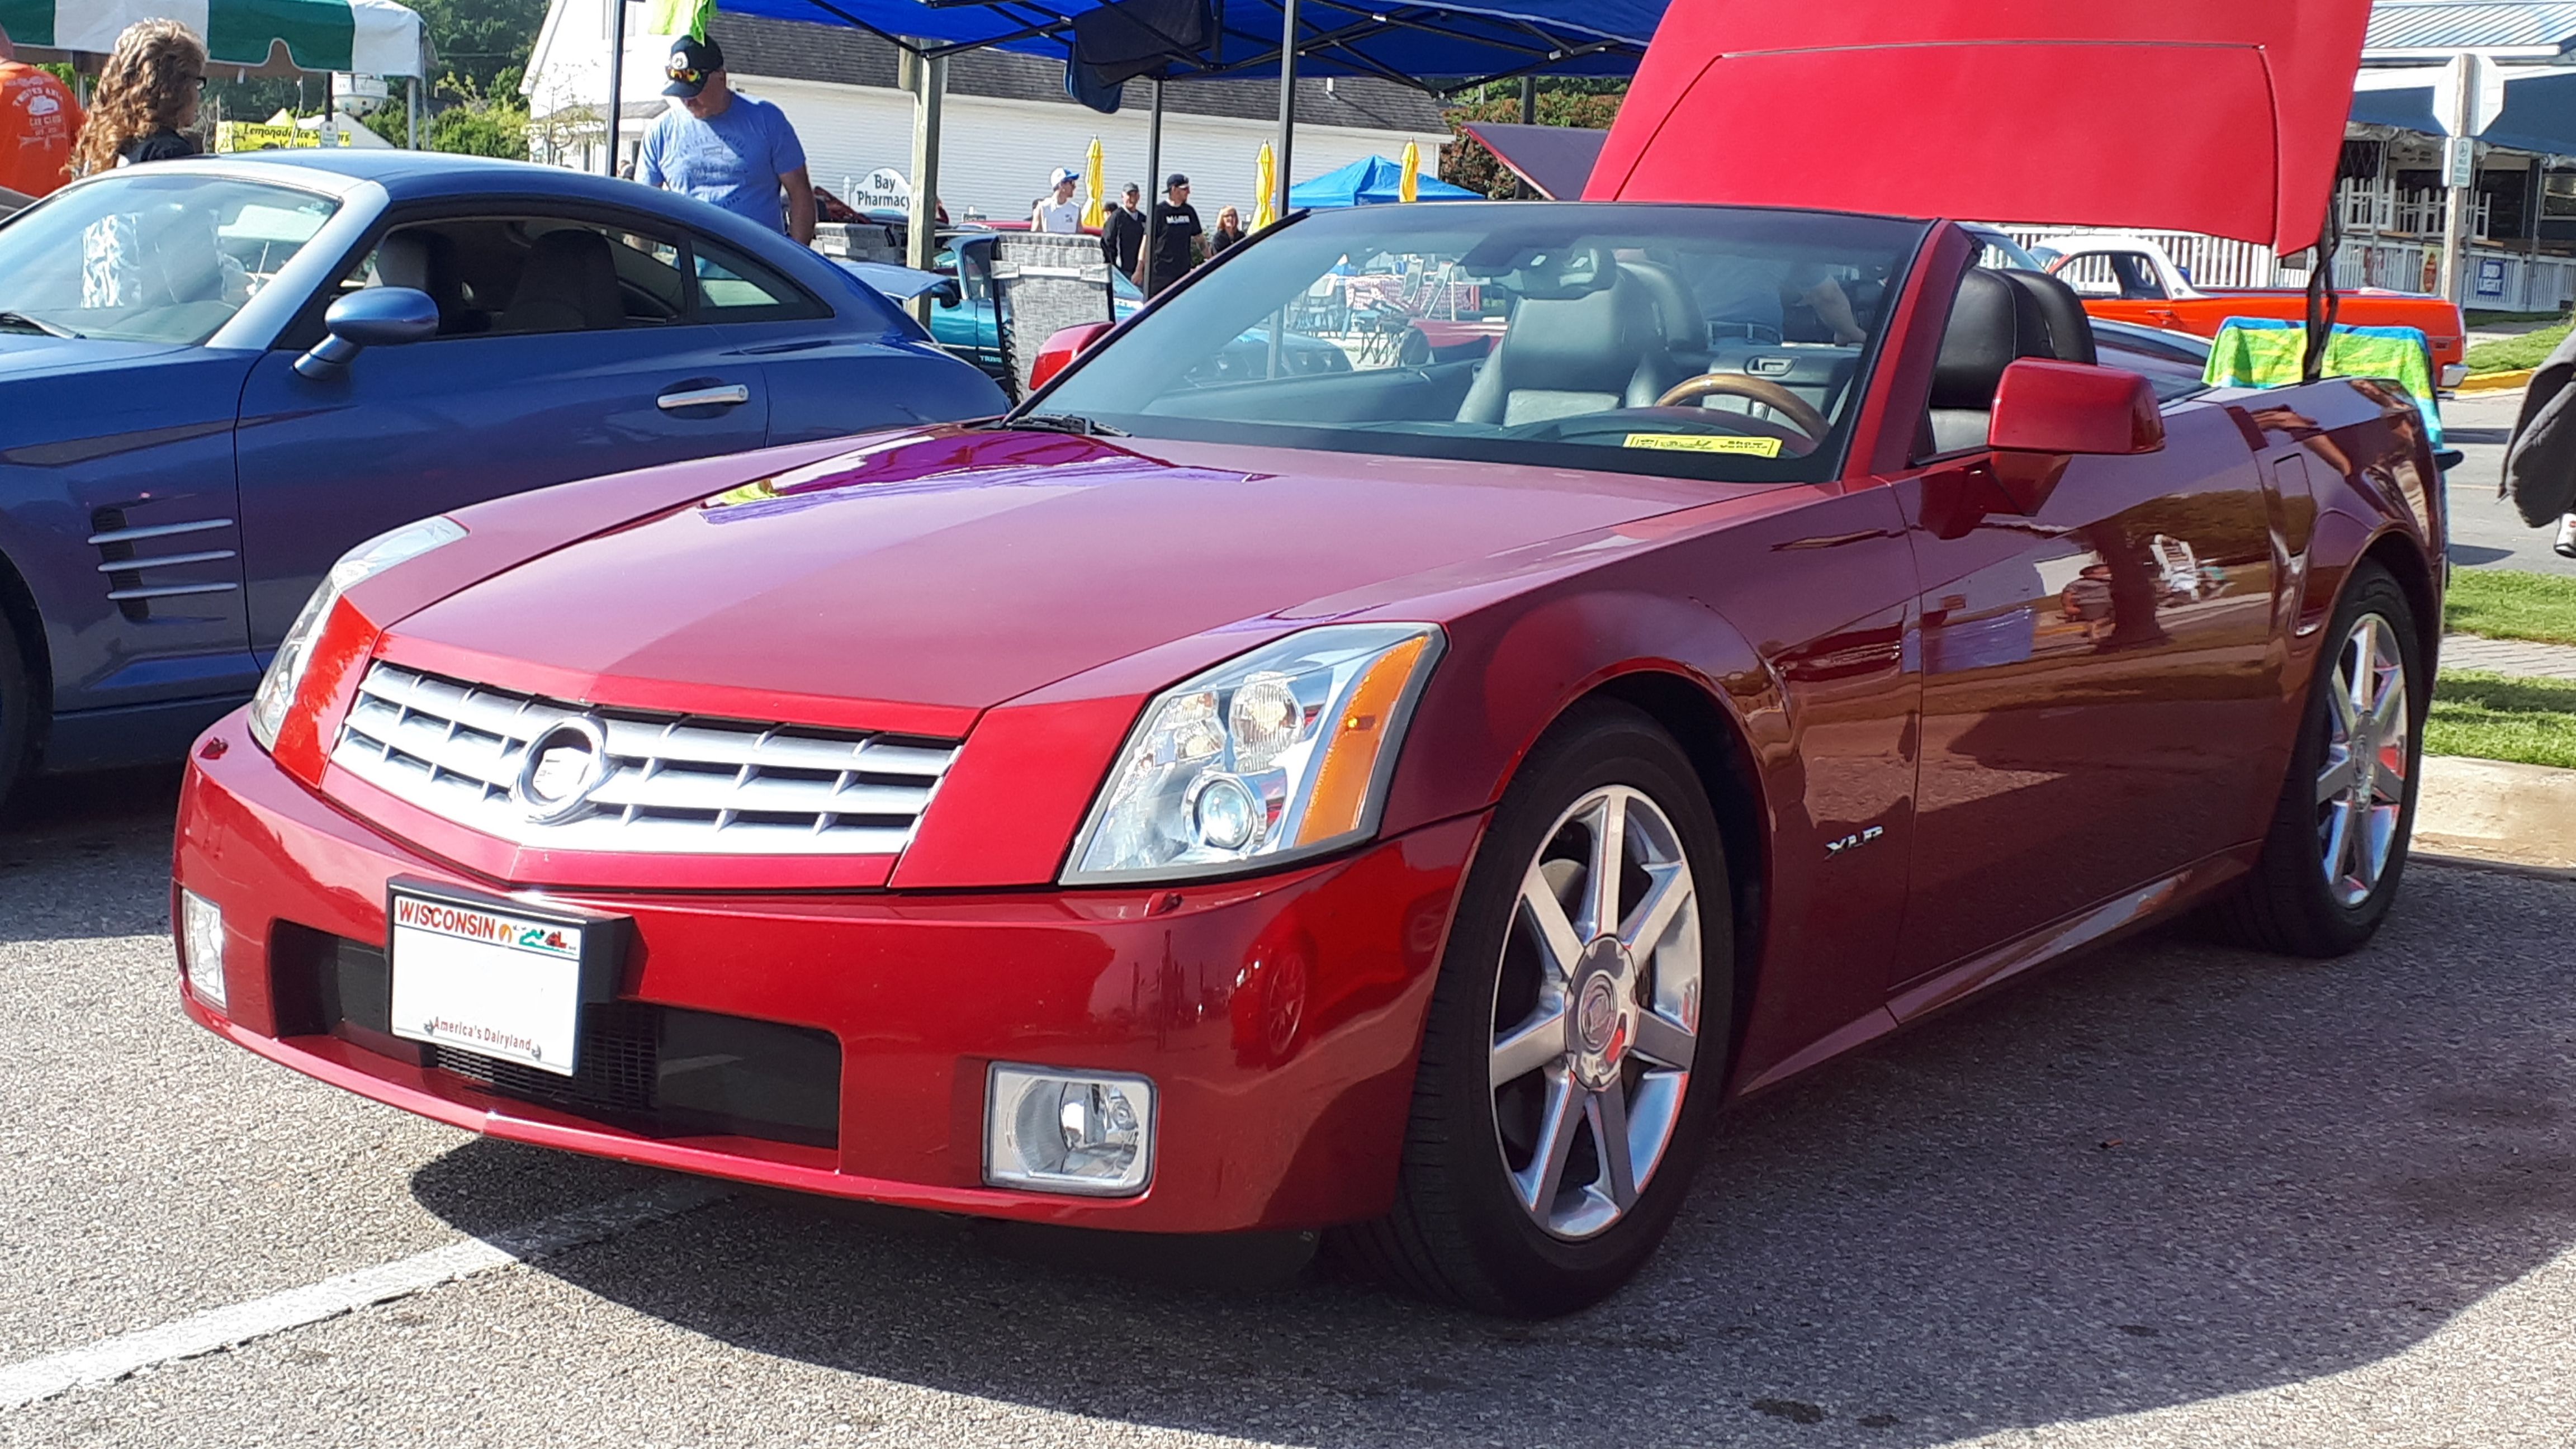 The 2009 Cadillac XLR Front View.